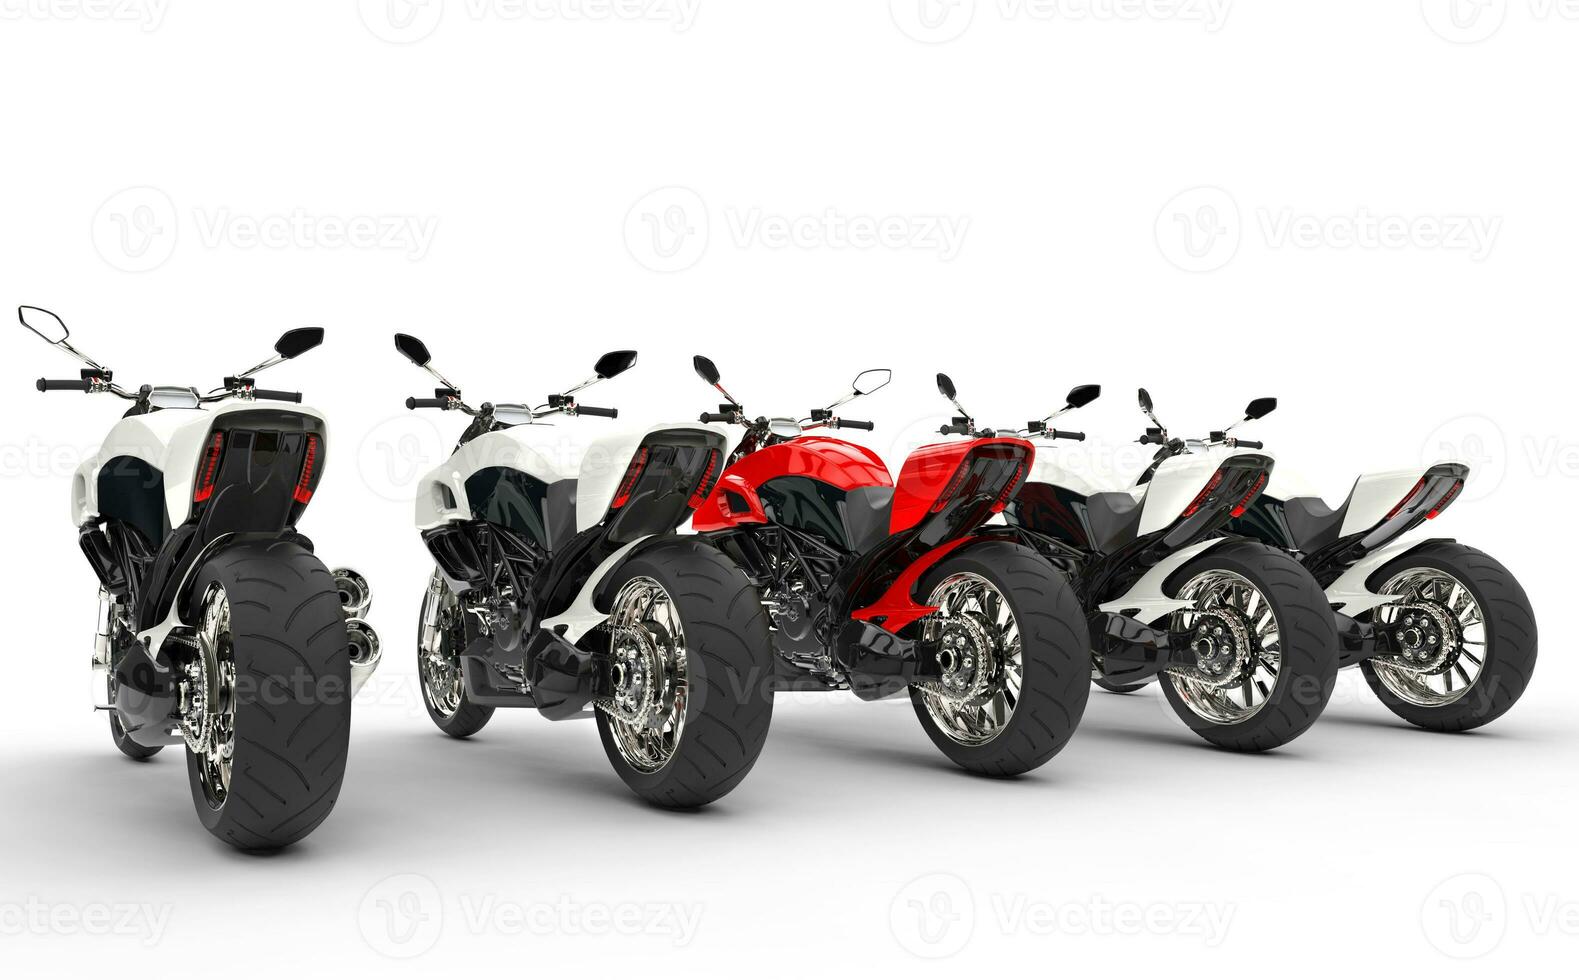 Cool motorcycles - red one stands out - back view - isolated on white background photo